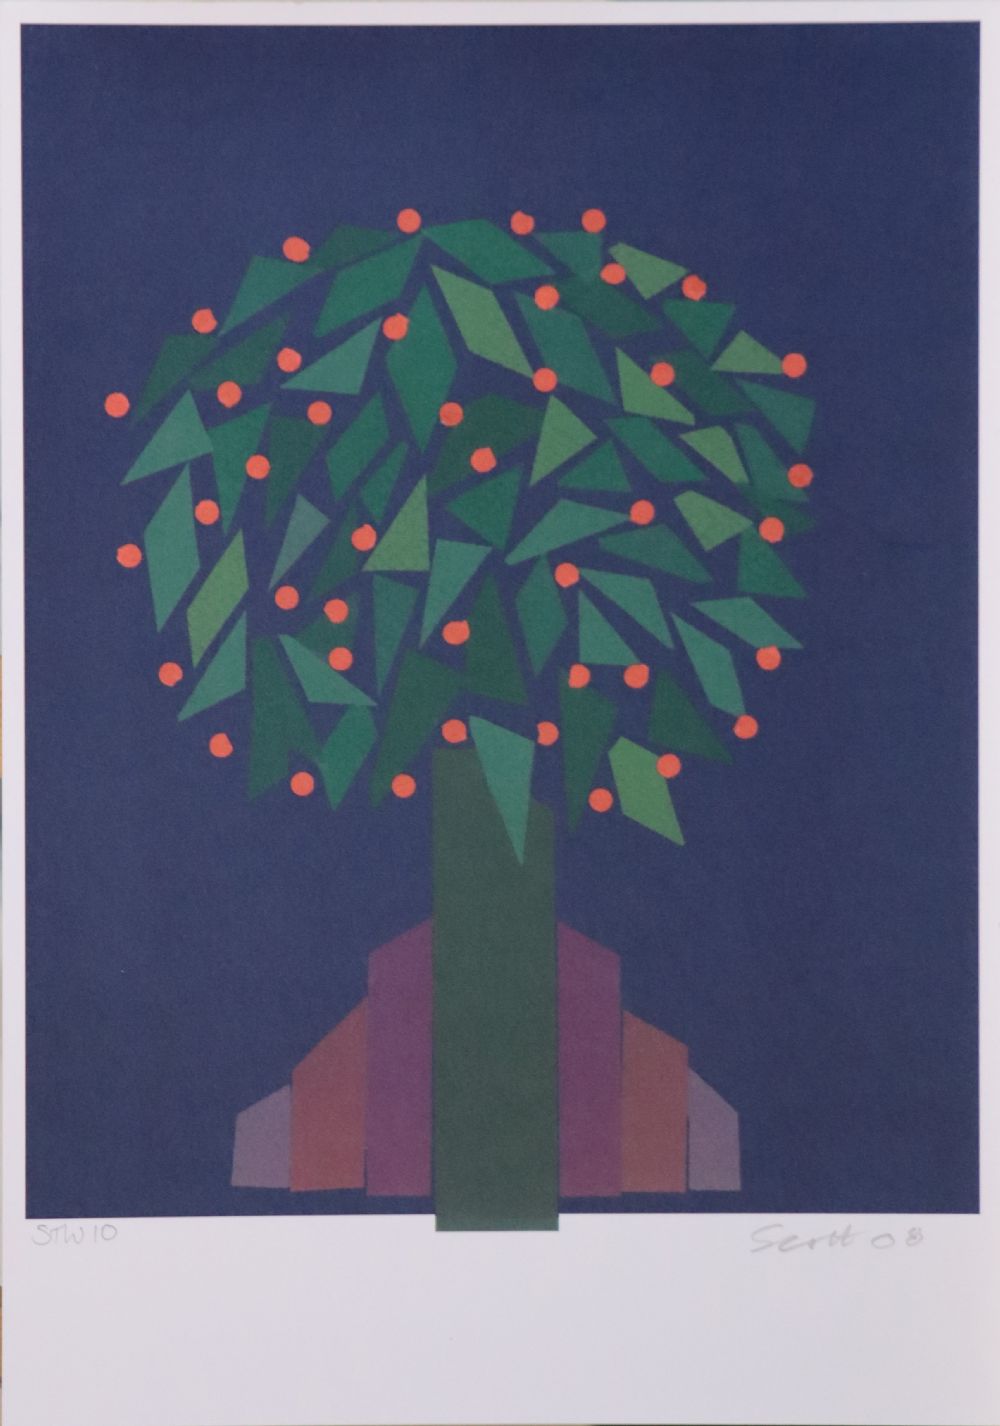 CHRISTMAS CARD FOR SCOTT TALLON WALKER, 2008 by Patrick Scott  at deVeres Auctions